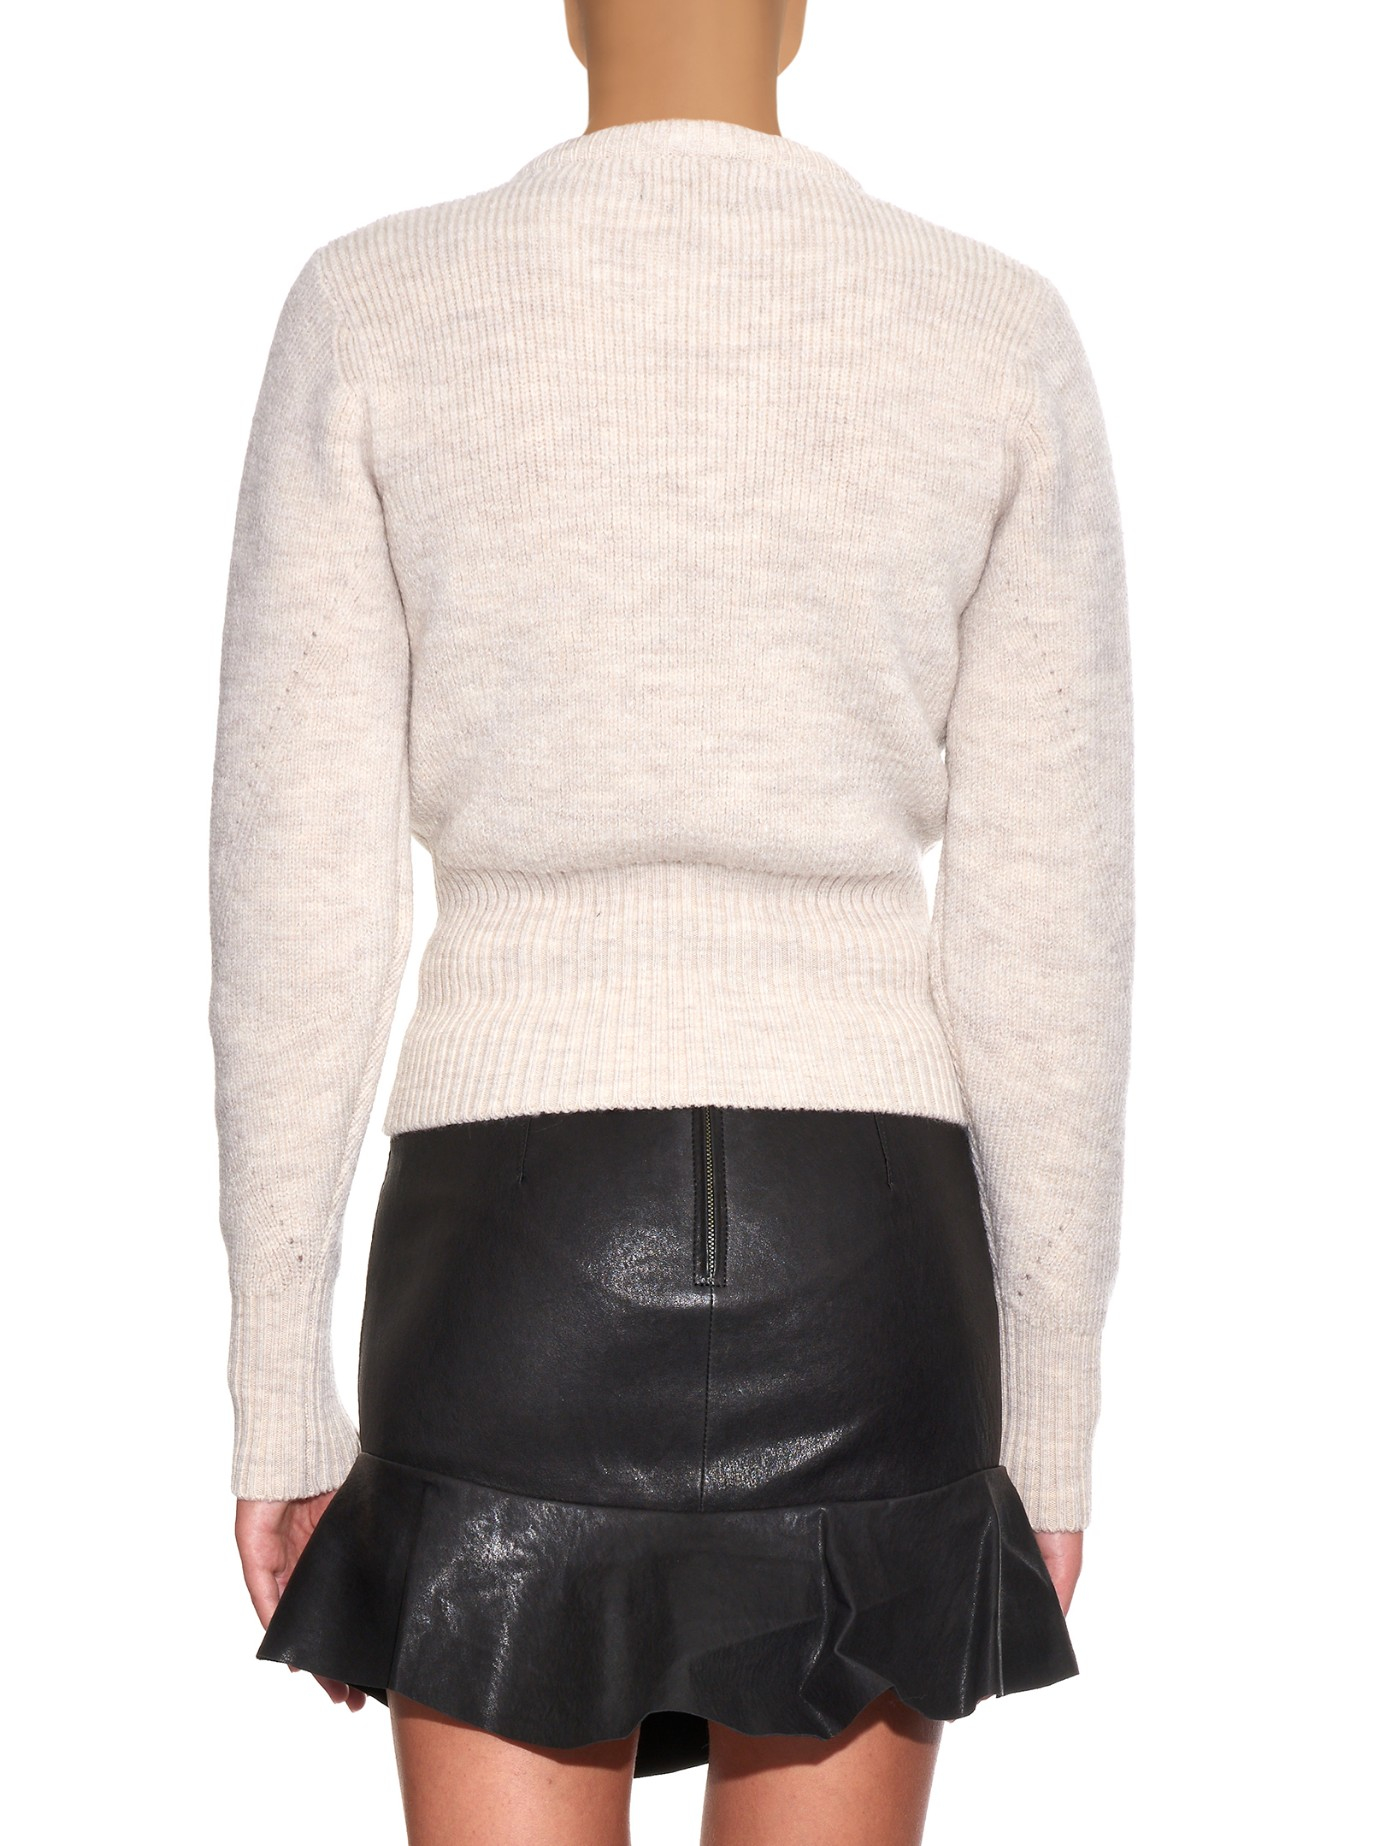 Isabel Marant Lace-up Wool-blend Sweater in Ivory (White) - Lyst